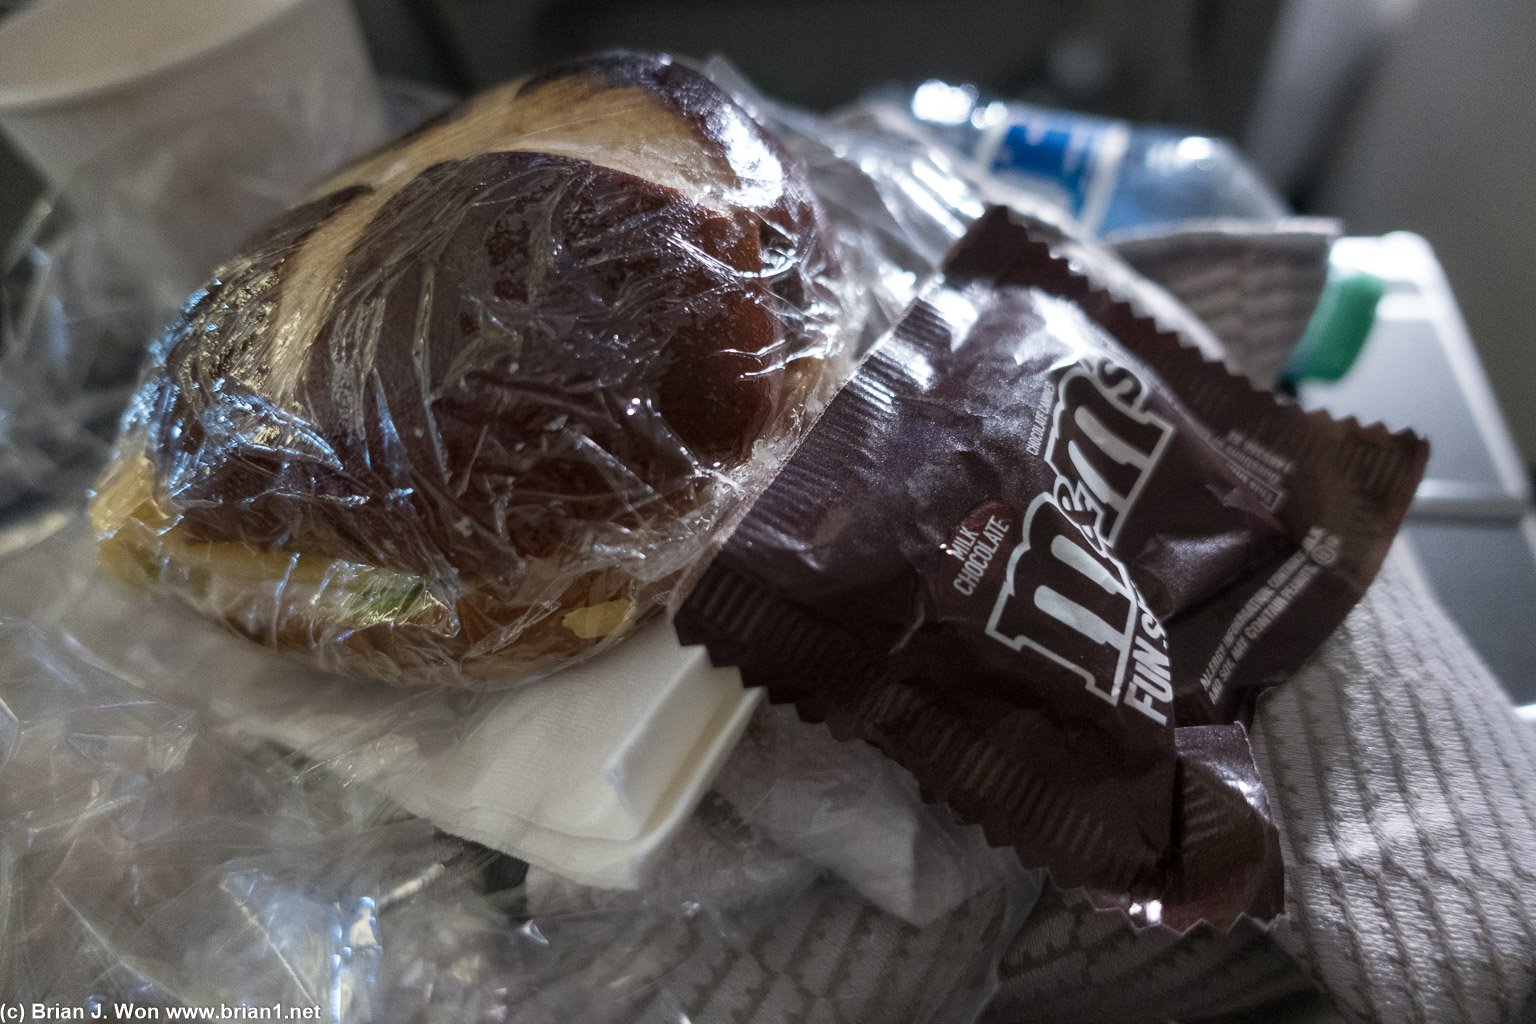 Forgot to photograph the mid-flight snack. Some sort of sandwich.